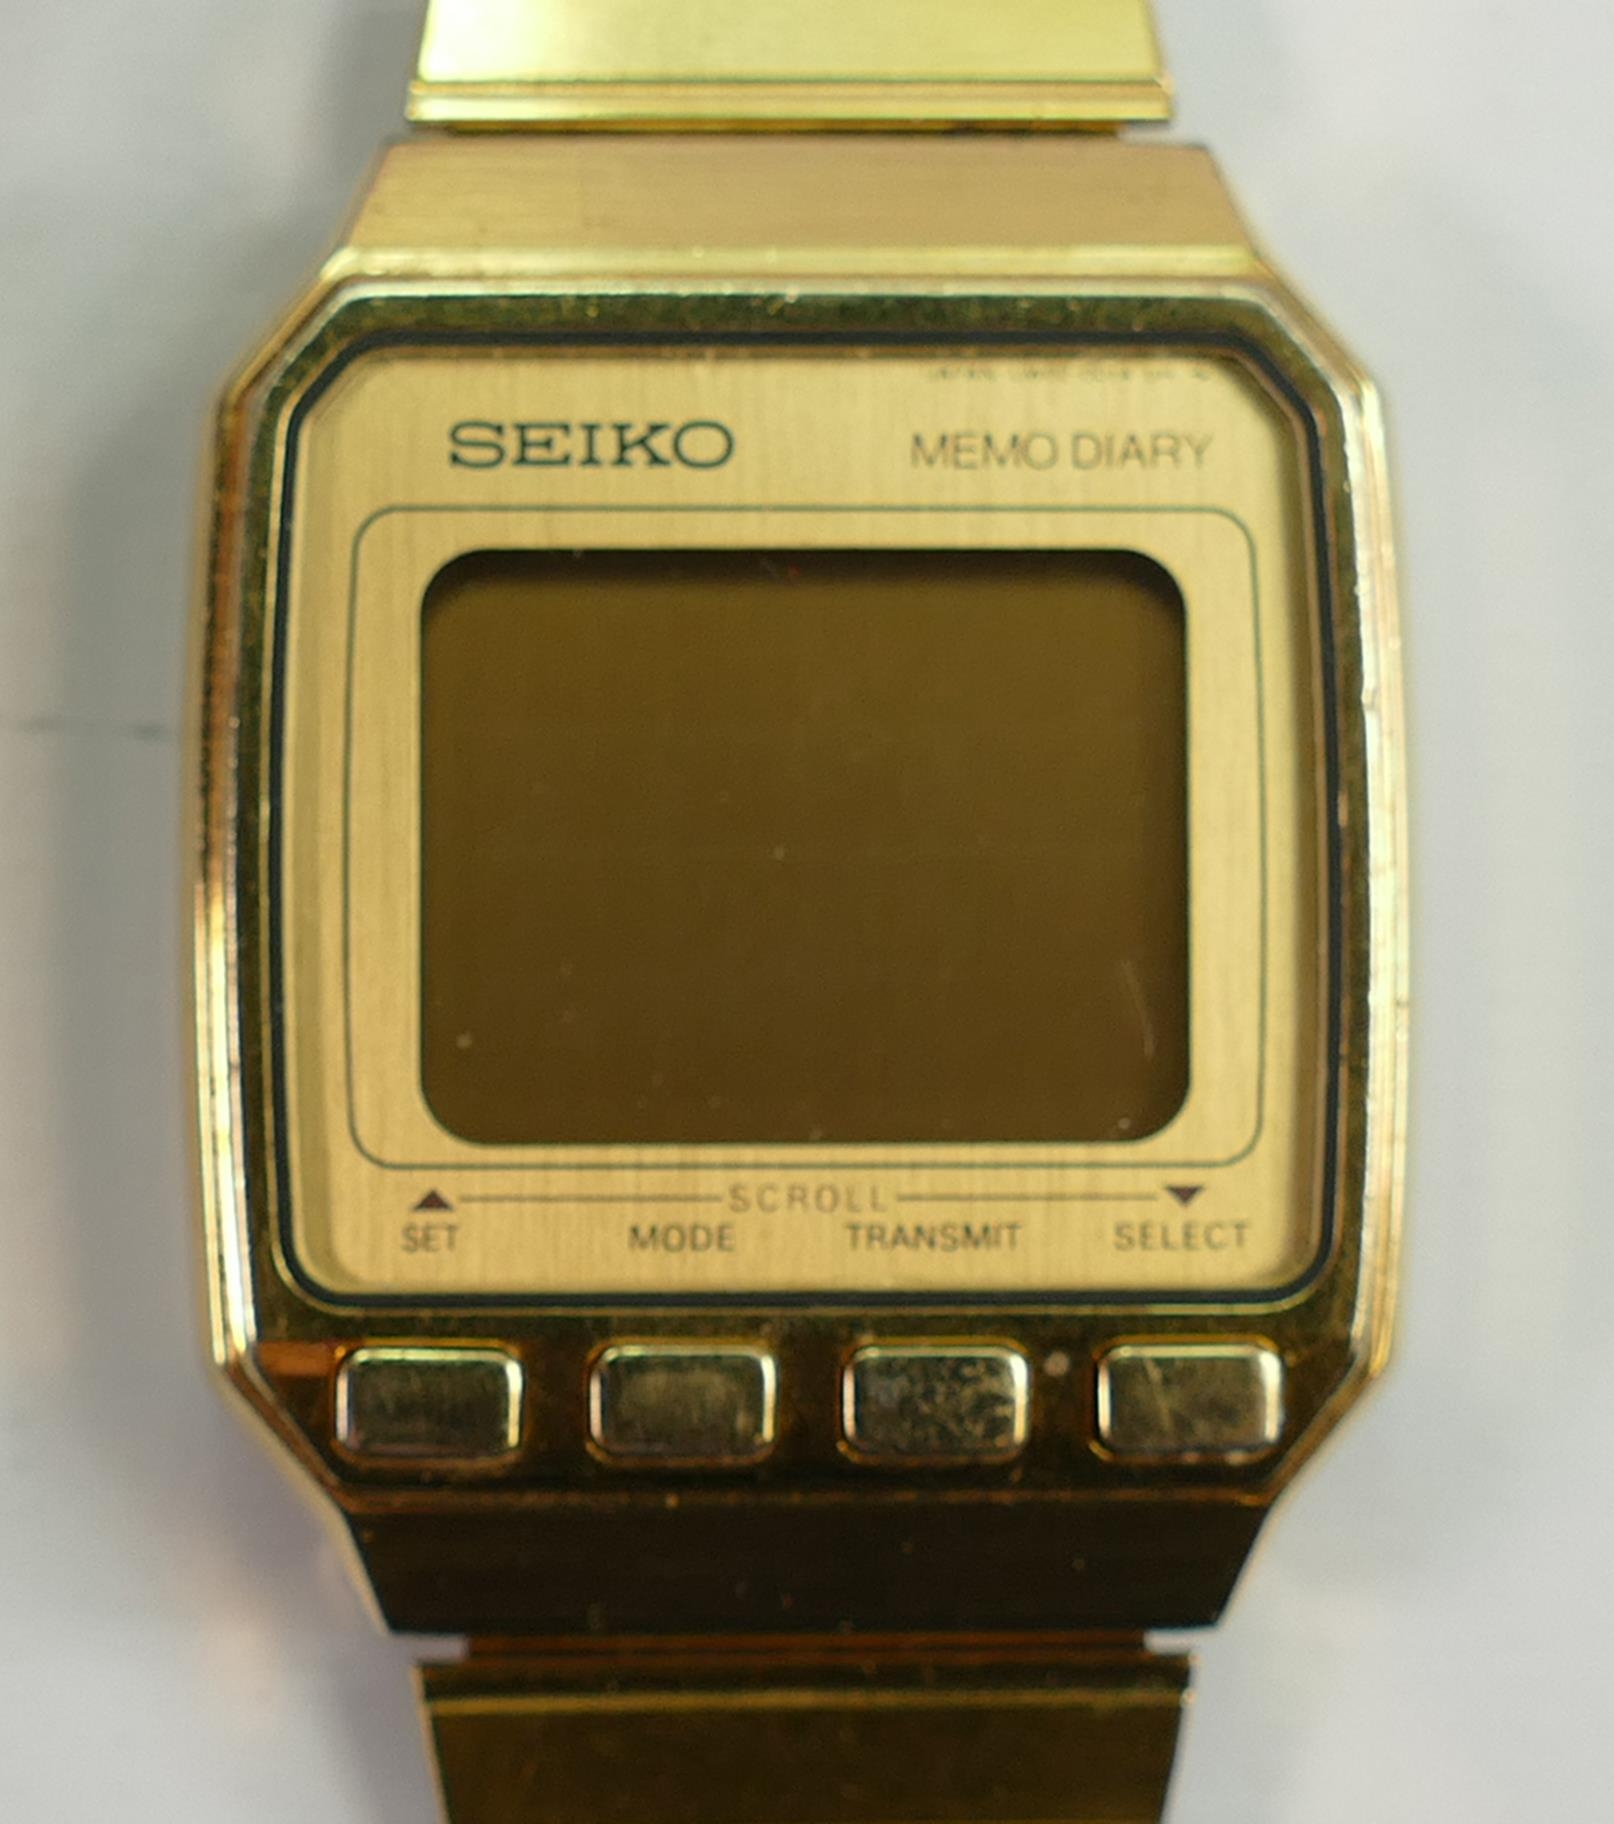 Boxed with instructions Seiko Memo Diary Retro Watch with Diary pad: sorry no battery to test but - Image 4 of 4